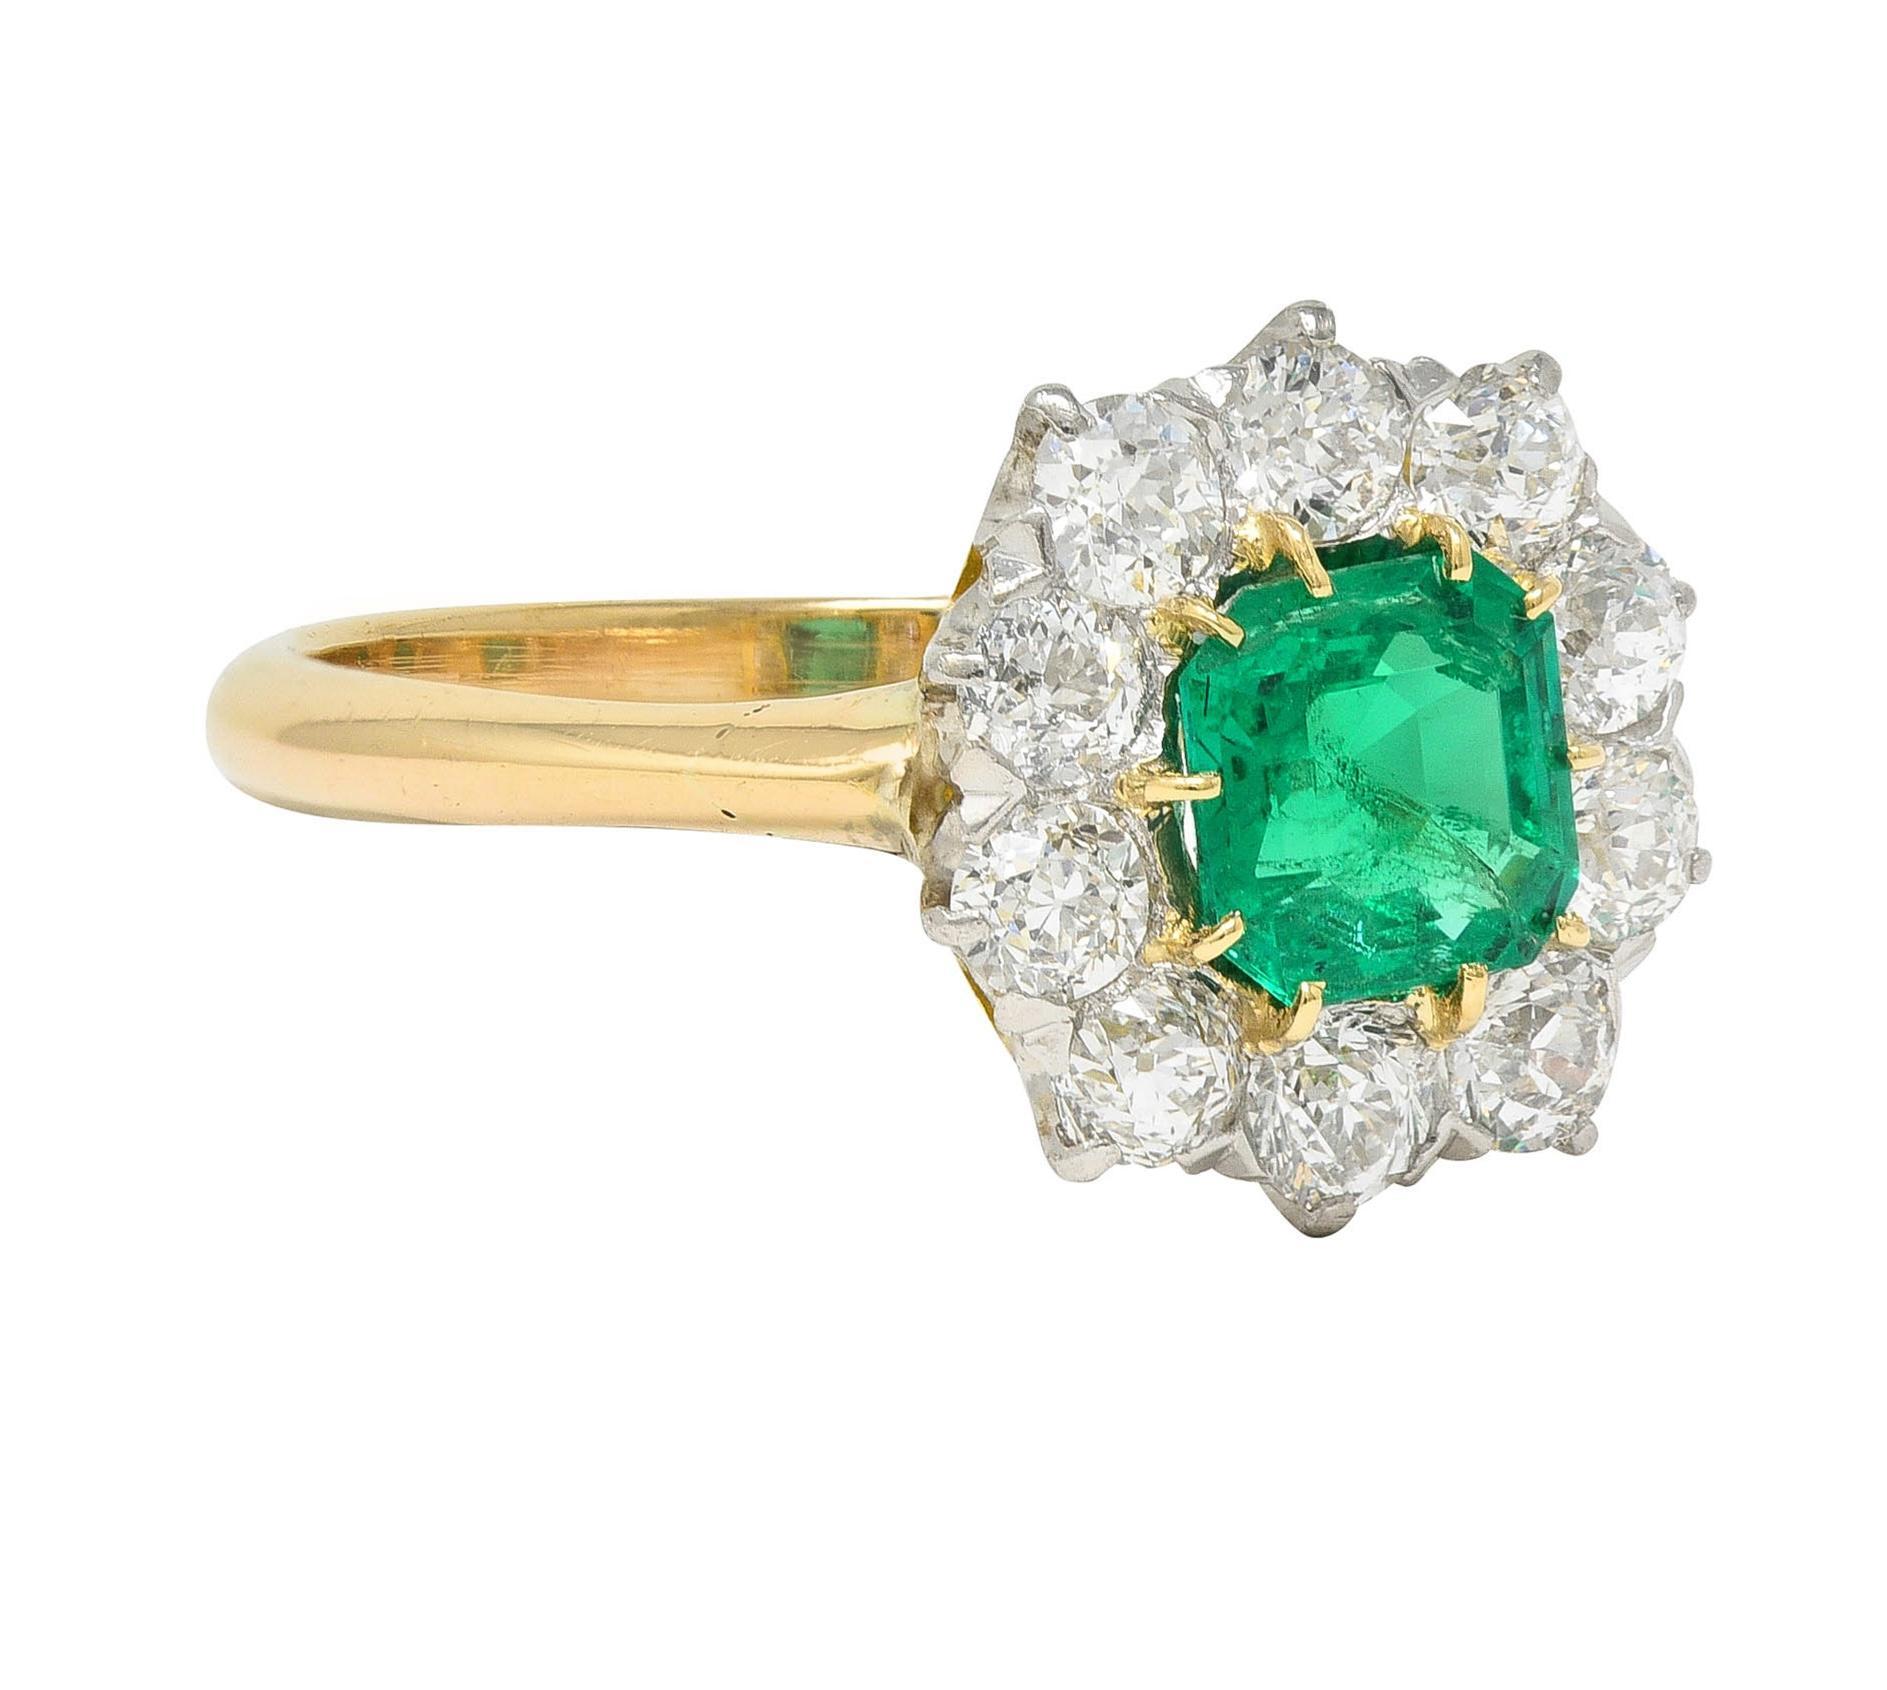 Centering an emerald cut emerald weighing approximately 0.80 carat - transparent medium green 
Set with gold talon prongs with a recessed platinum halo surround of old European cut diamonds
Weighing approximately 1.00 carats total - G/H color with